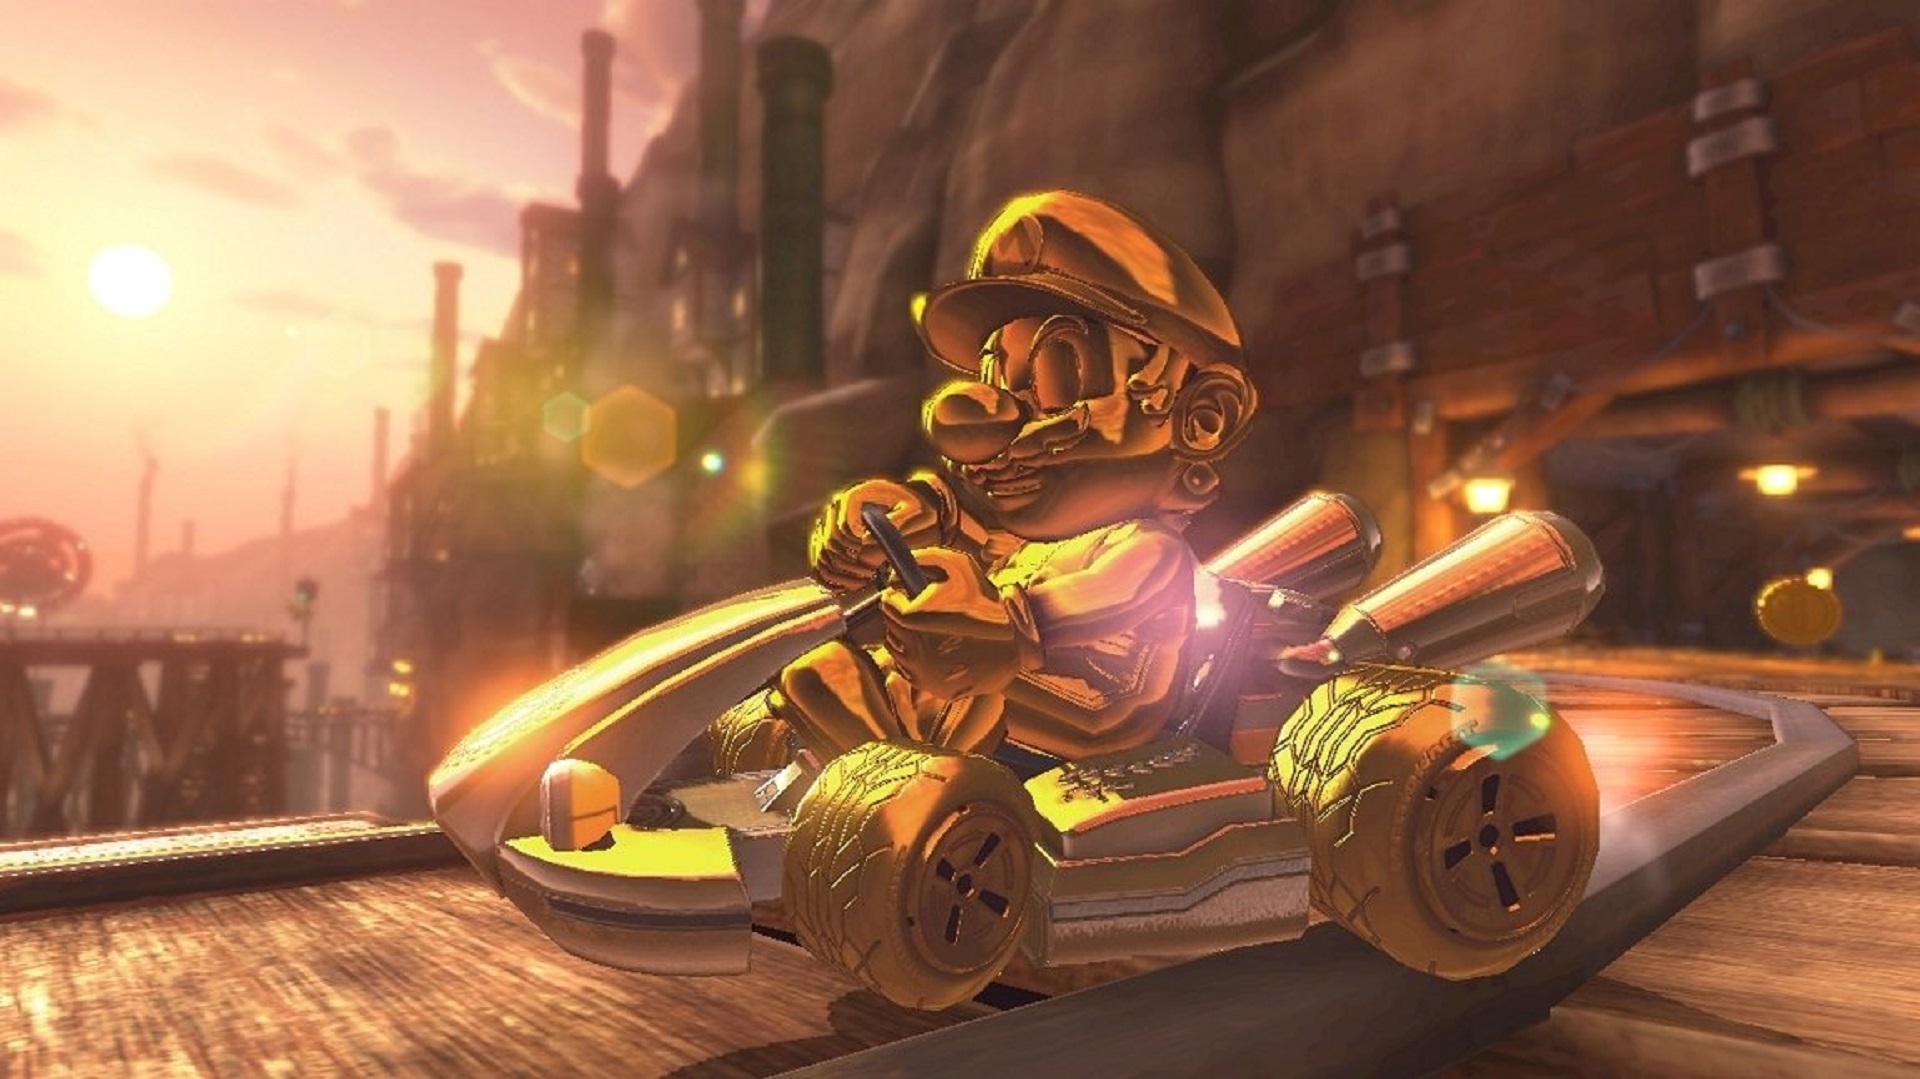 Gold Mario, the only playable character among the Mario Kart 8 Deluxe unlockables